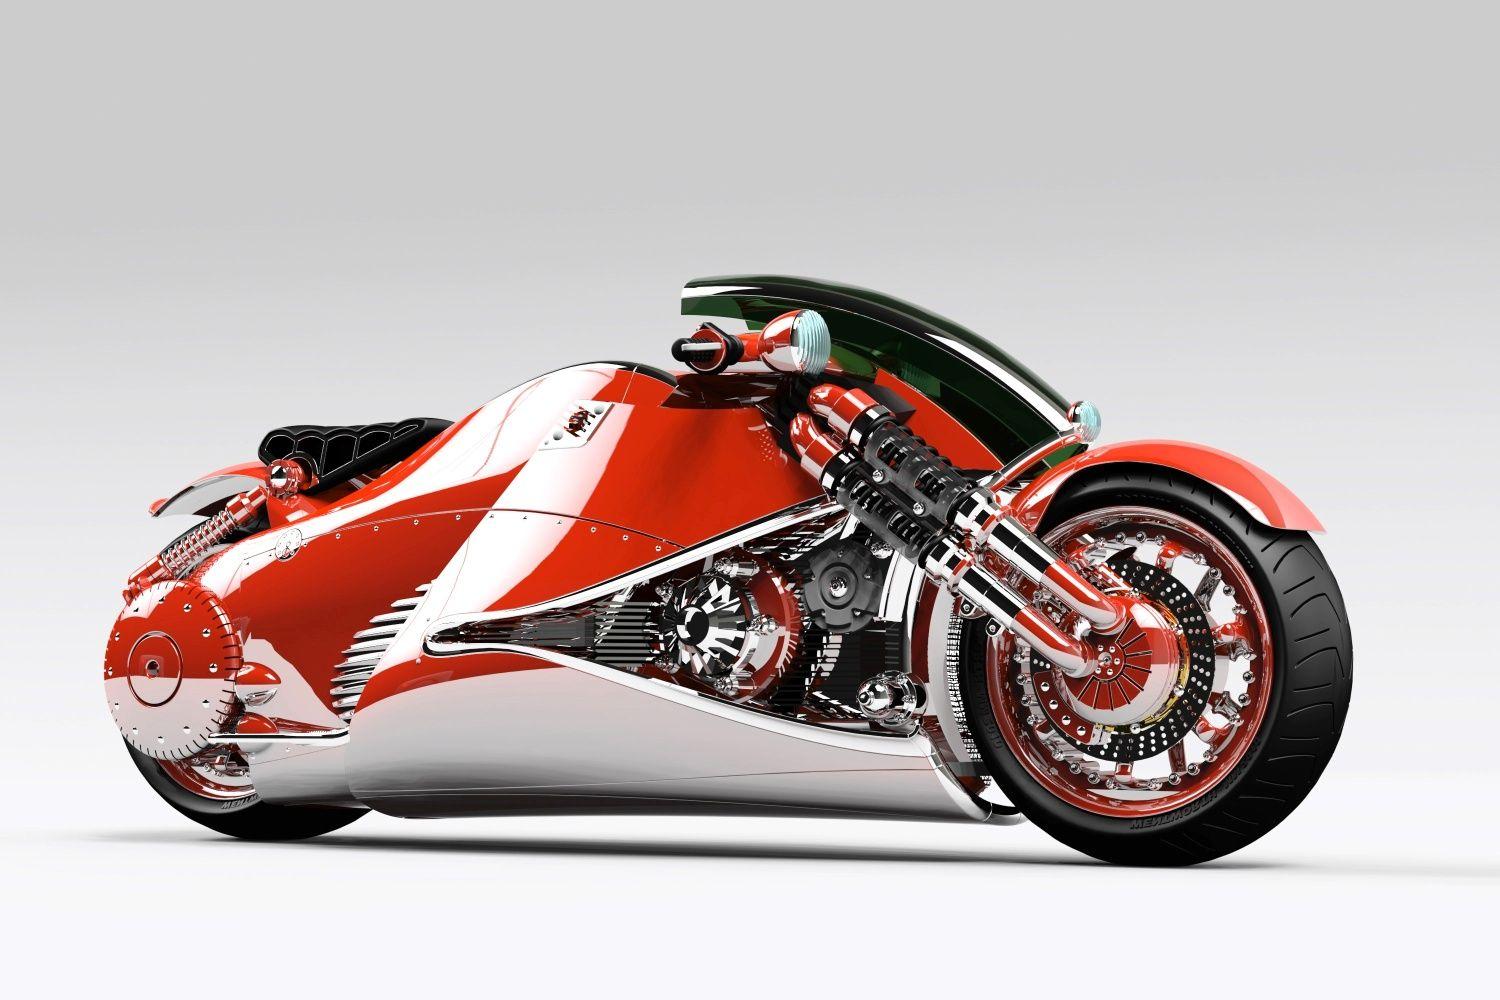 Futuristic Motorcycle Wallpapers - Top Free Futuristic Motorcycle